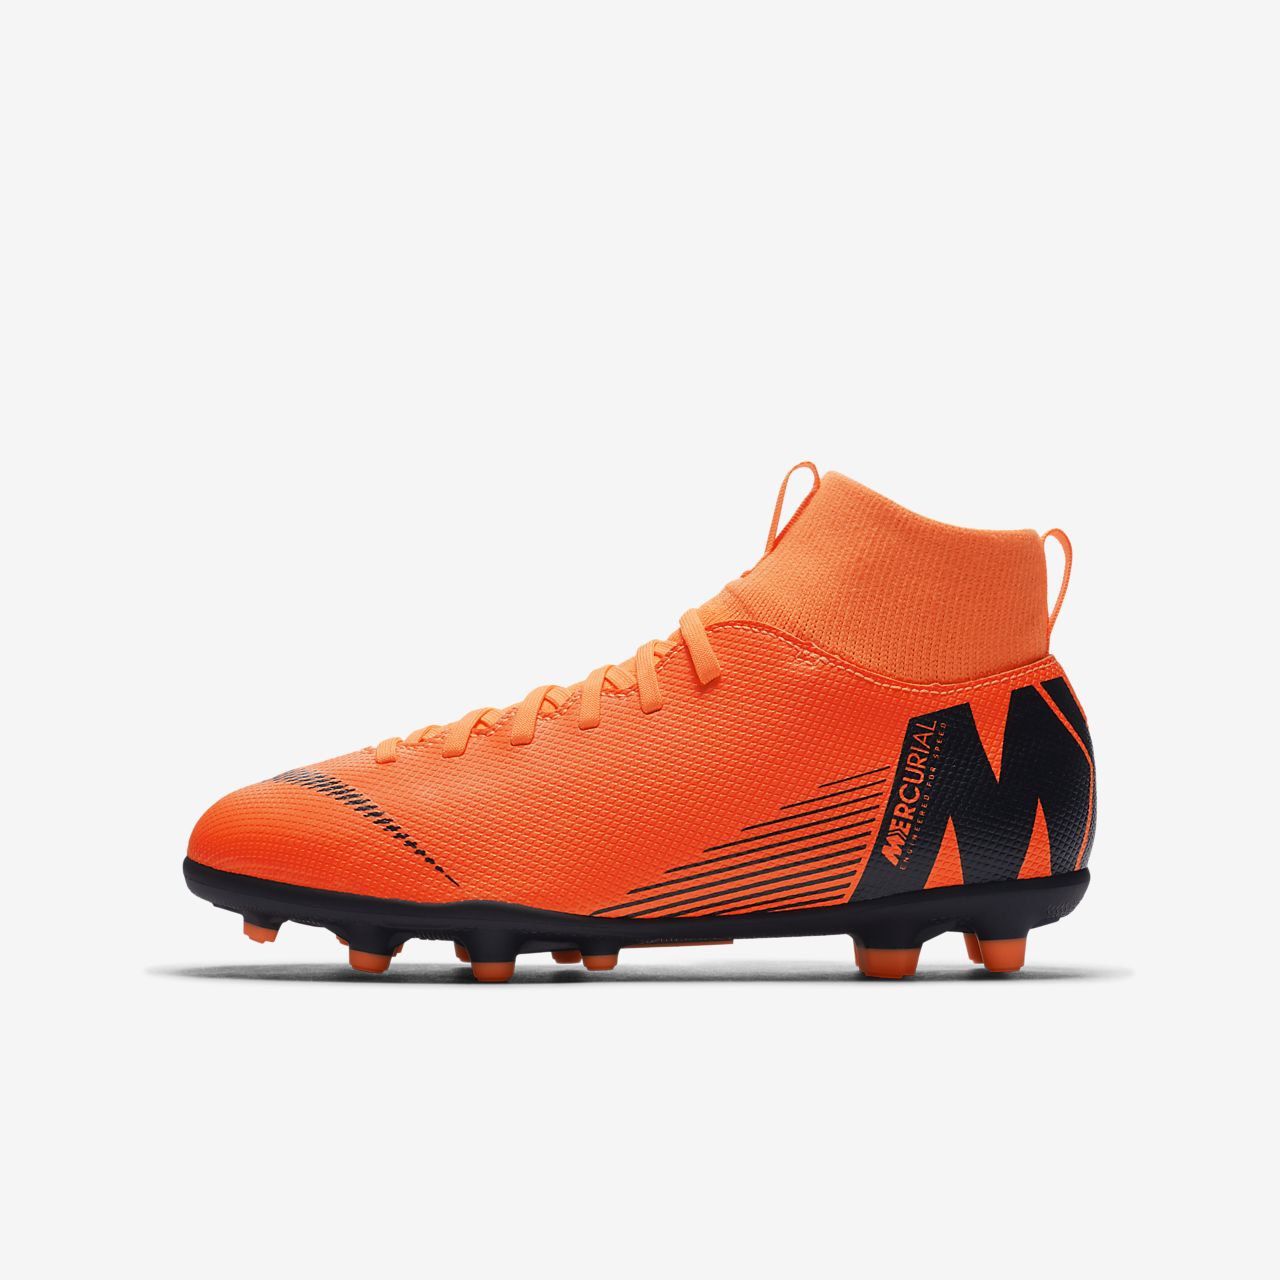 Reduced football boots for men Nike Mercurial Superfly 6 Elite Fg.